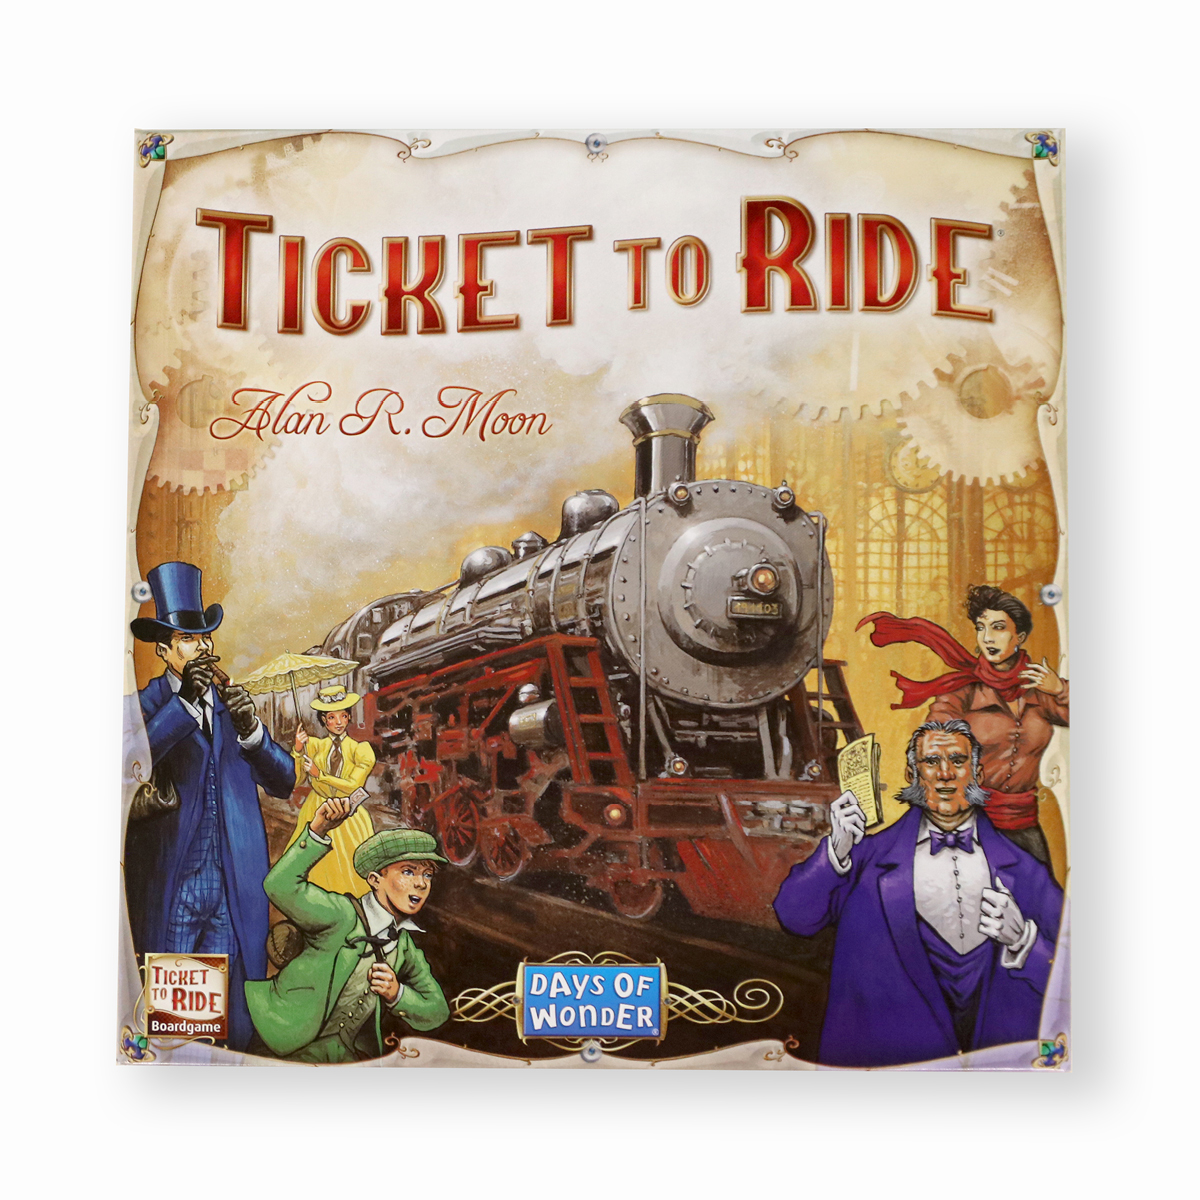 facts about the song ticket to ride